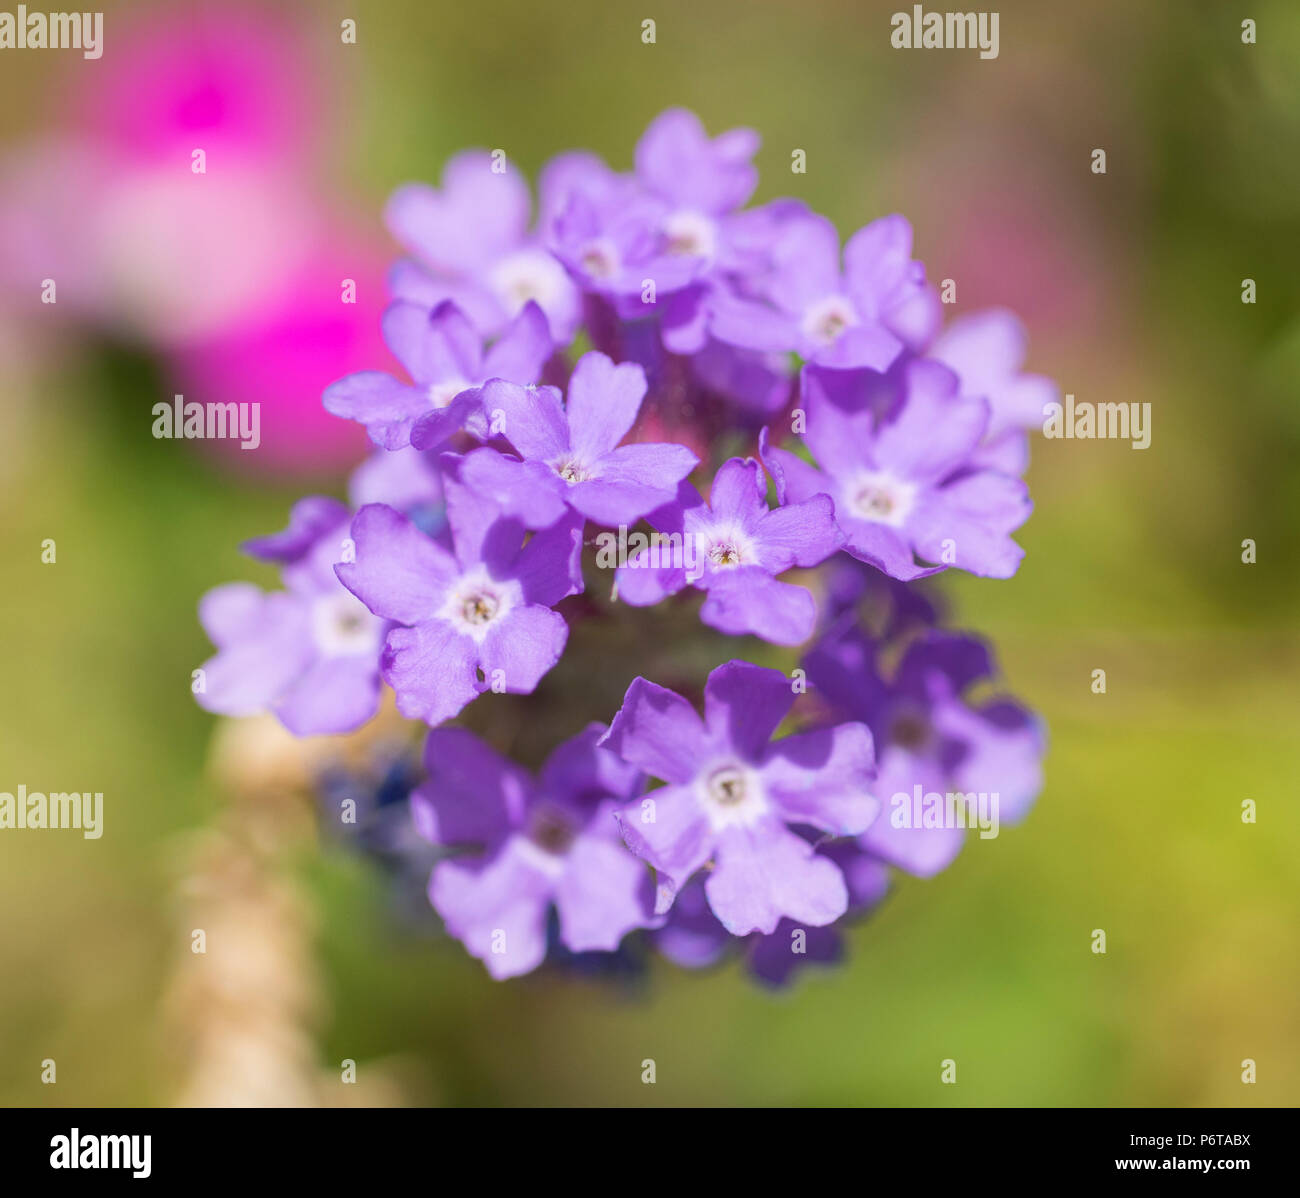 Close-up detail of a bunch of purple Elizabeth Earle flowers Primula allionii in garden Stock Photo